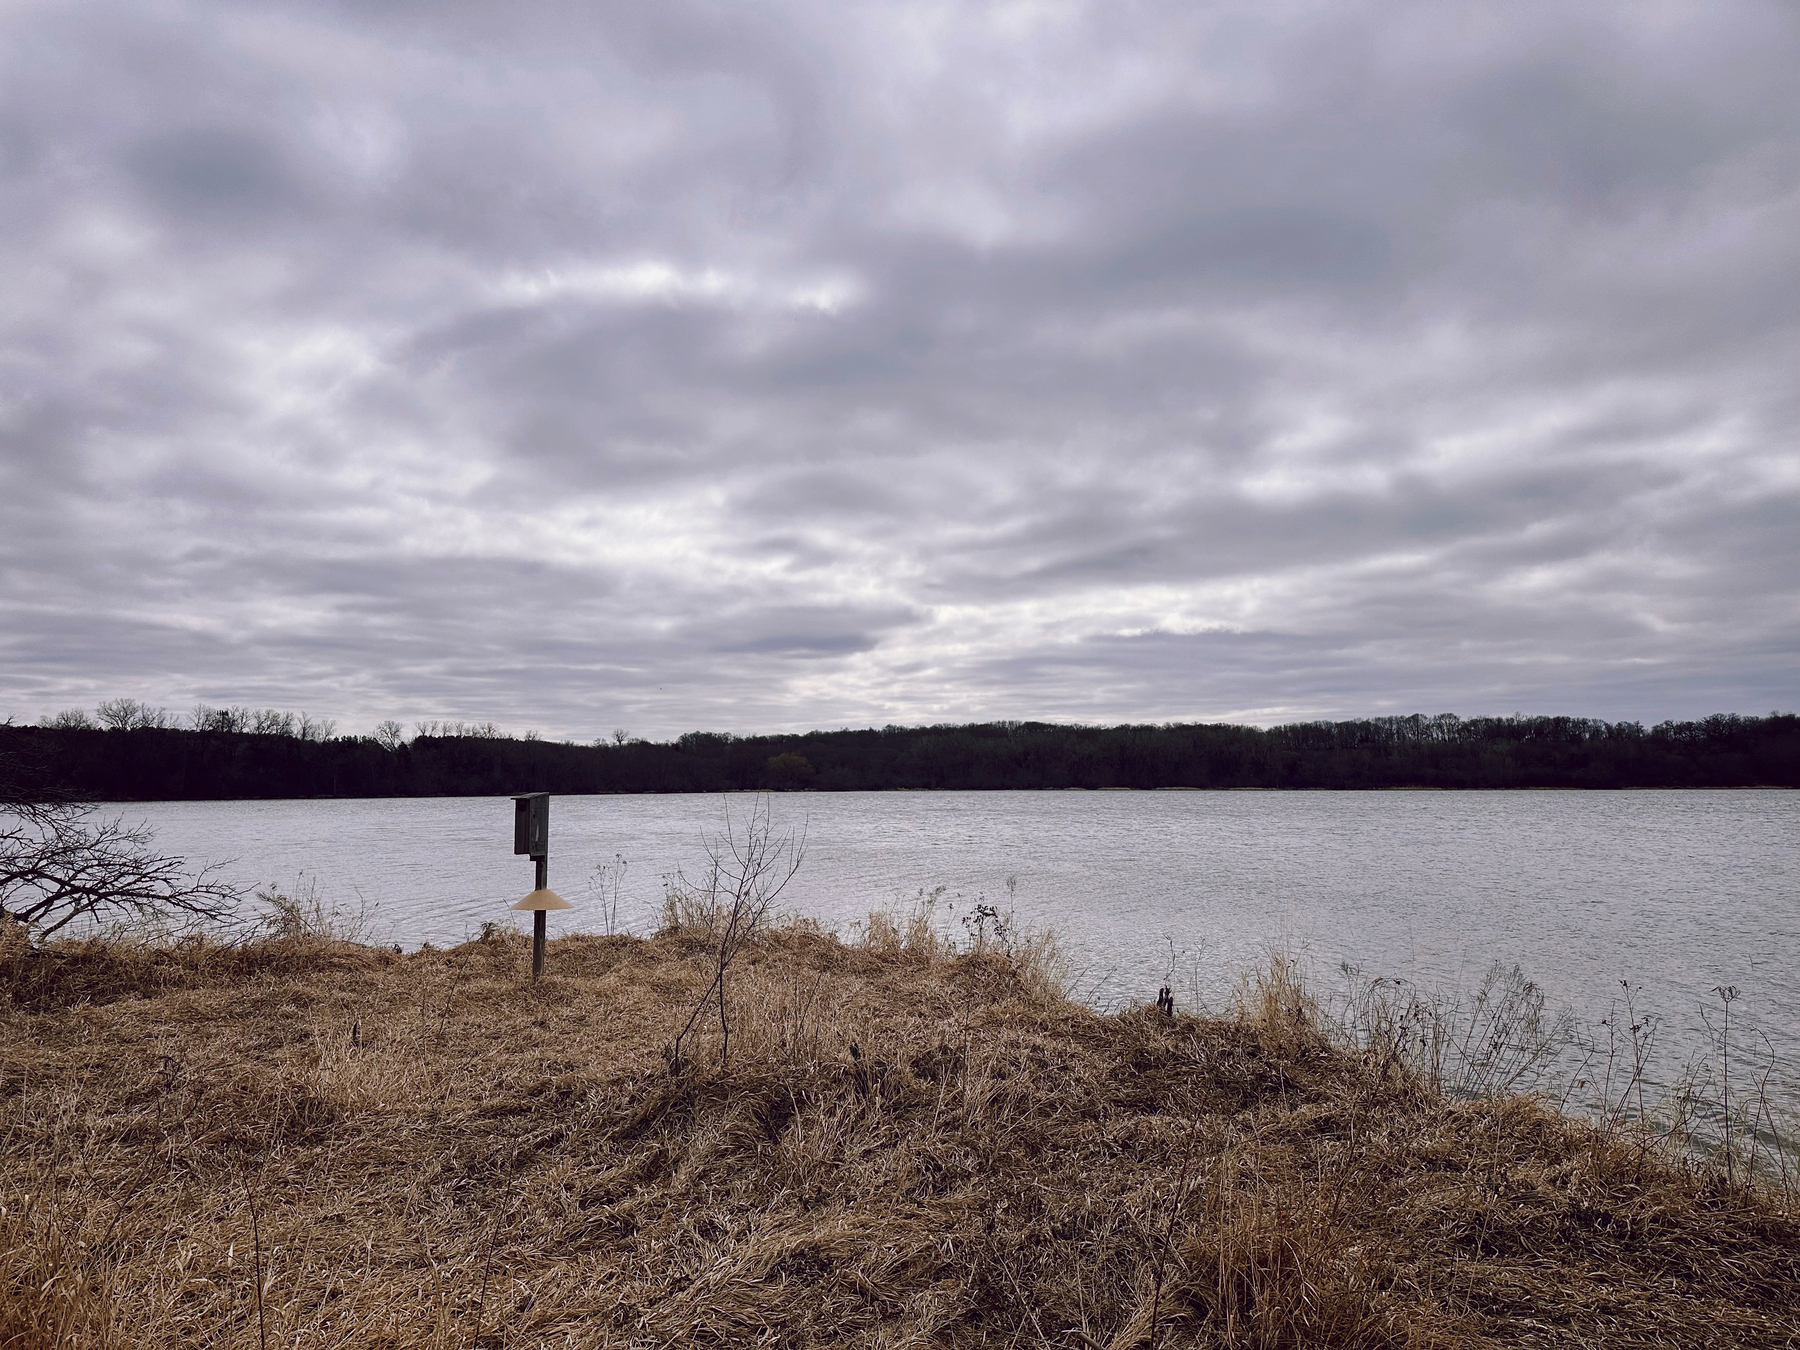 A cloudy sky over a tranquil body of water with a wooden birdhouse on a post in the foreground and a forest lining the far shore.